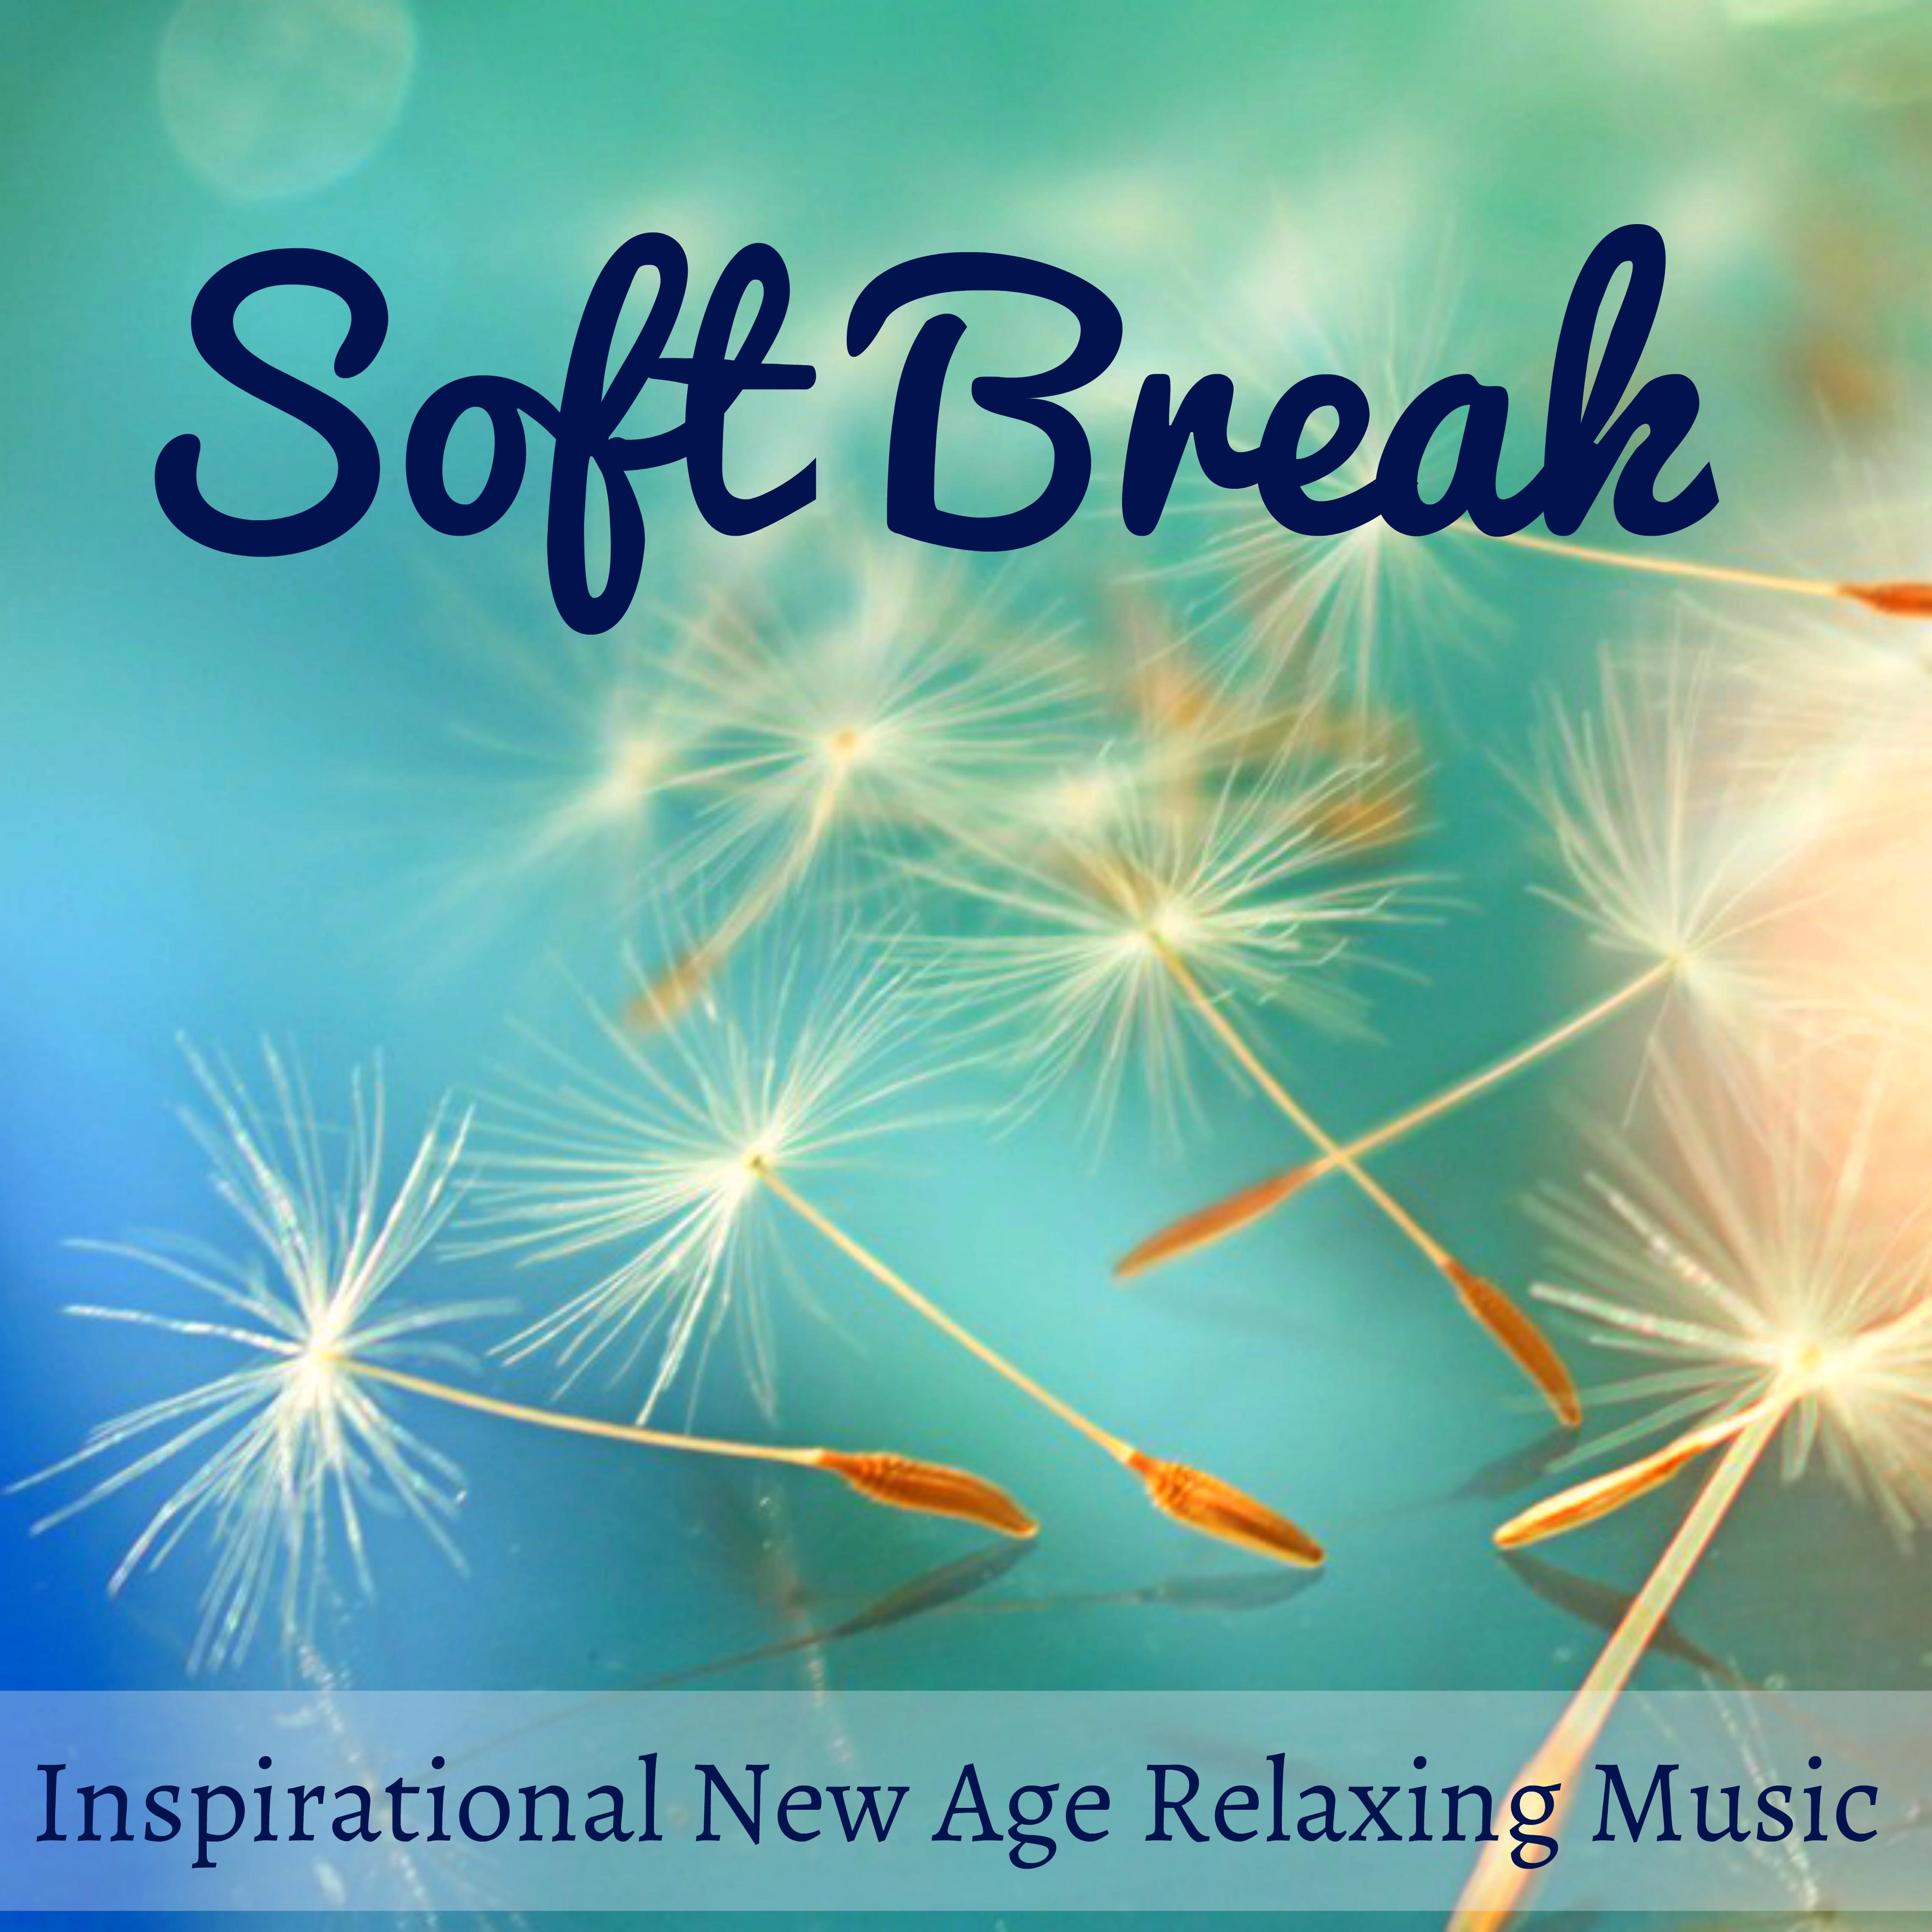 Soft Break - Inspirational New Age Relaxing Music for Mindful Meditation Chakras Healing Consciousness Expansion with Nature Instrumental Soothing Sounds